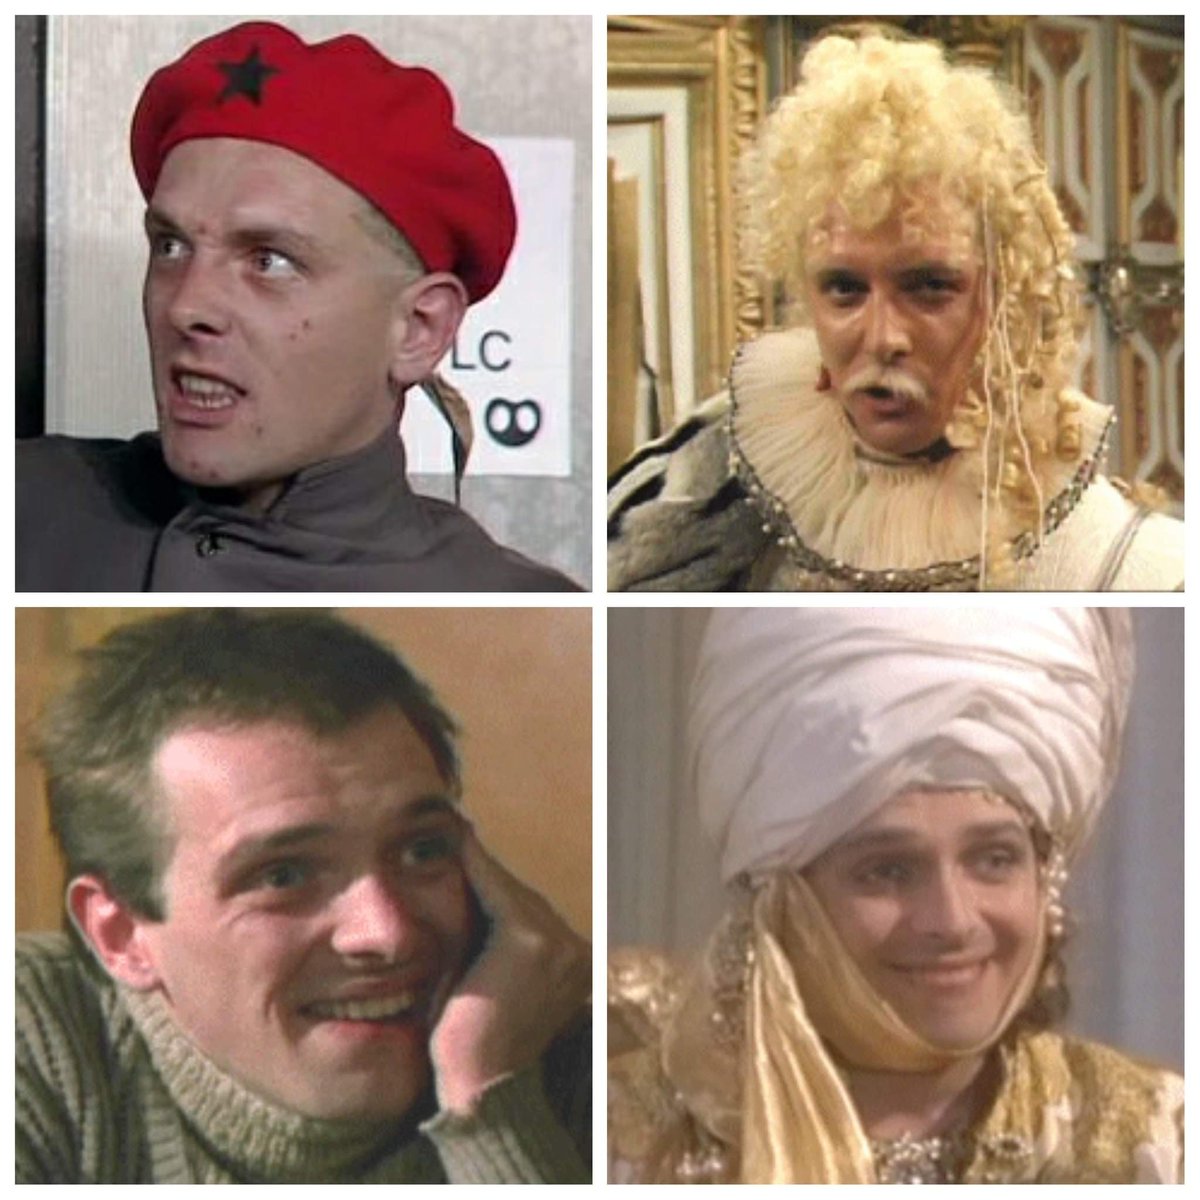 Remembering Rik Mayall, one of the funniest men alive. RIP. #RikMayall #rikmayallday